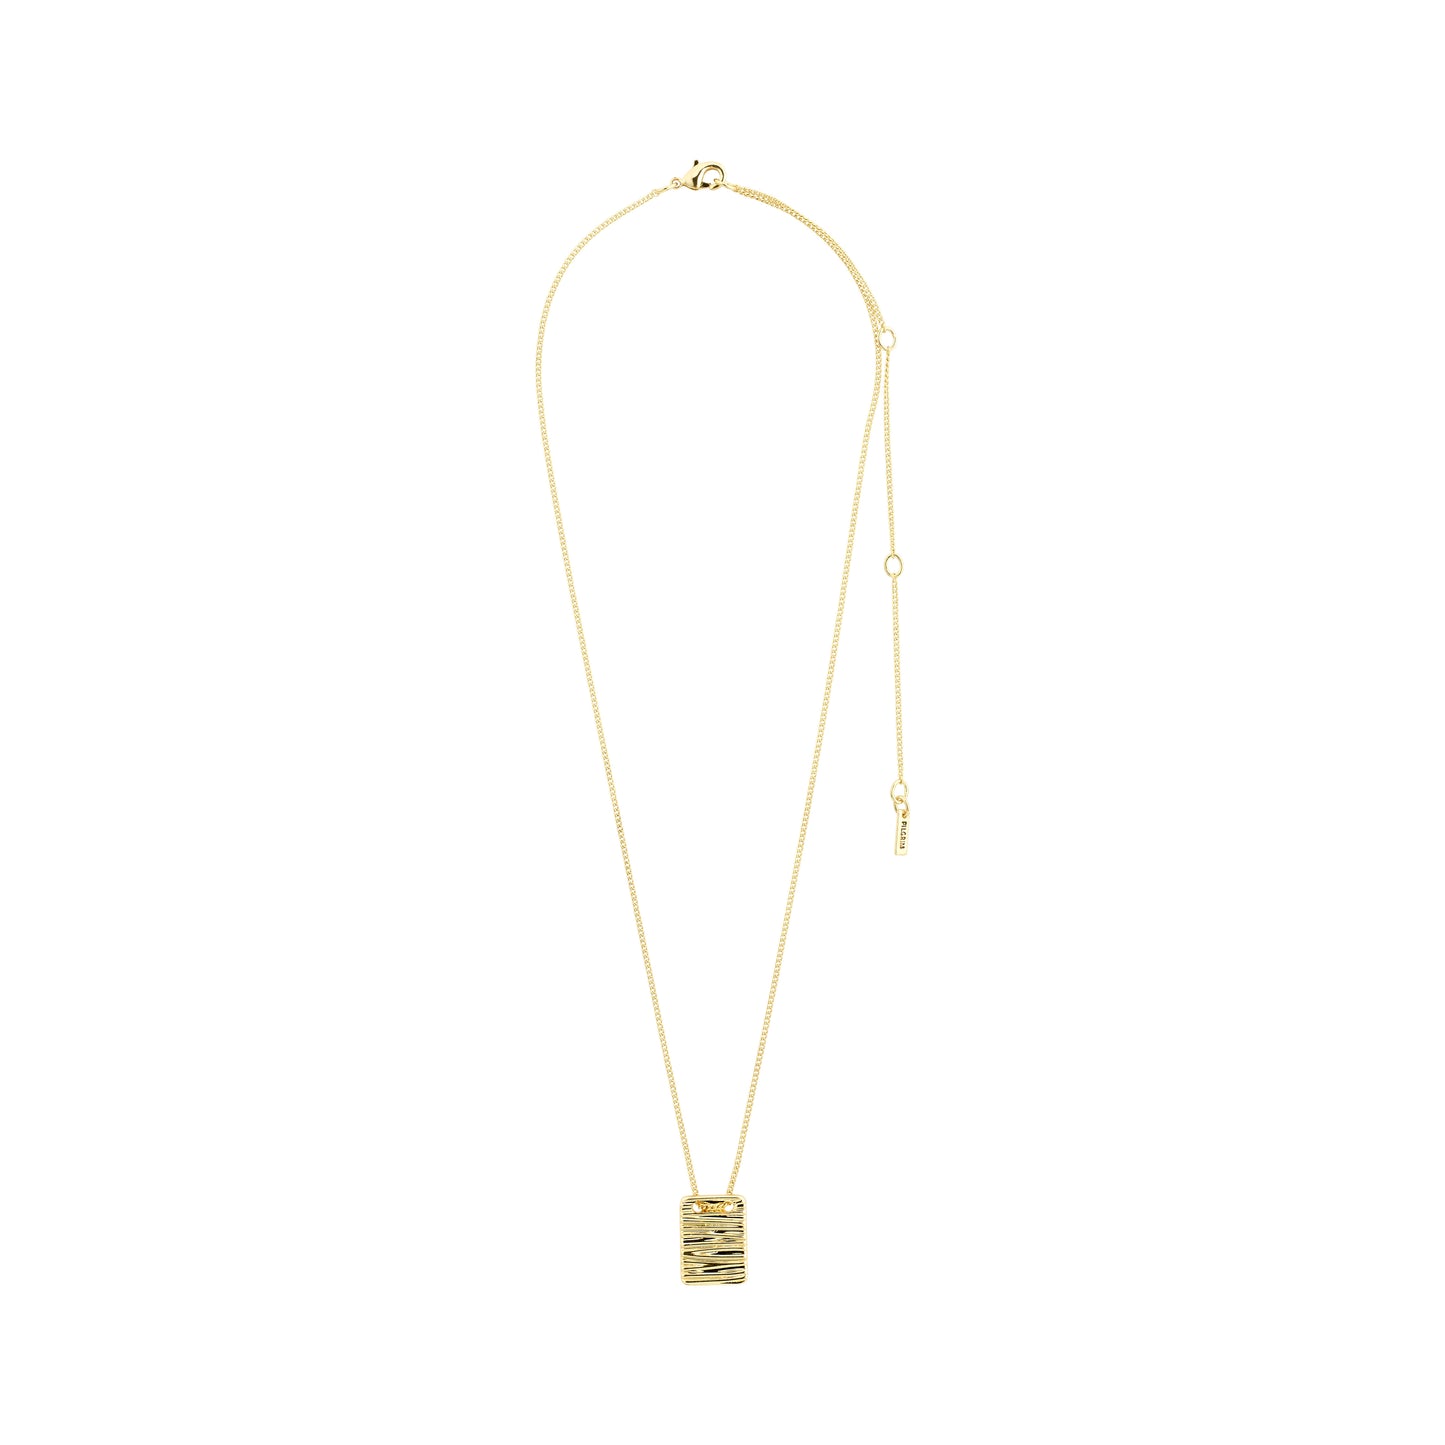 CARE recycled square coin necklace gold-plated